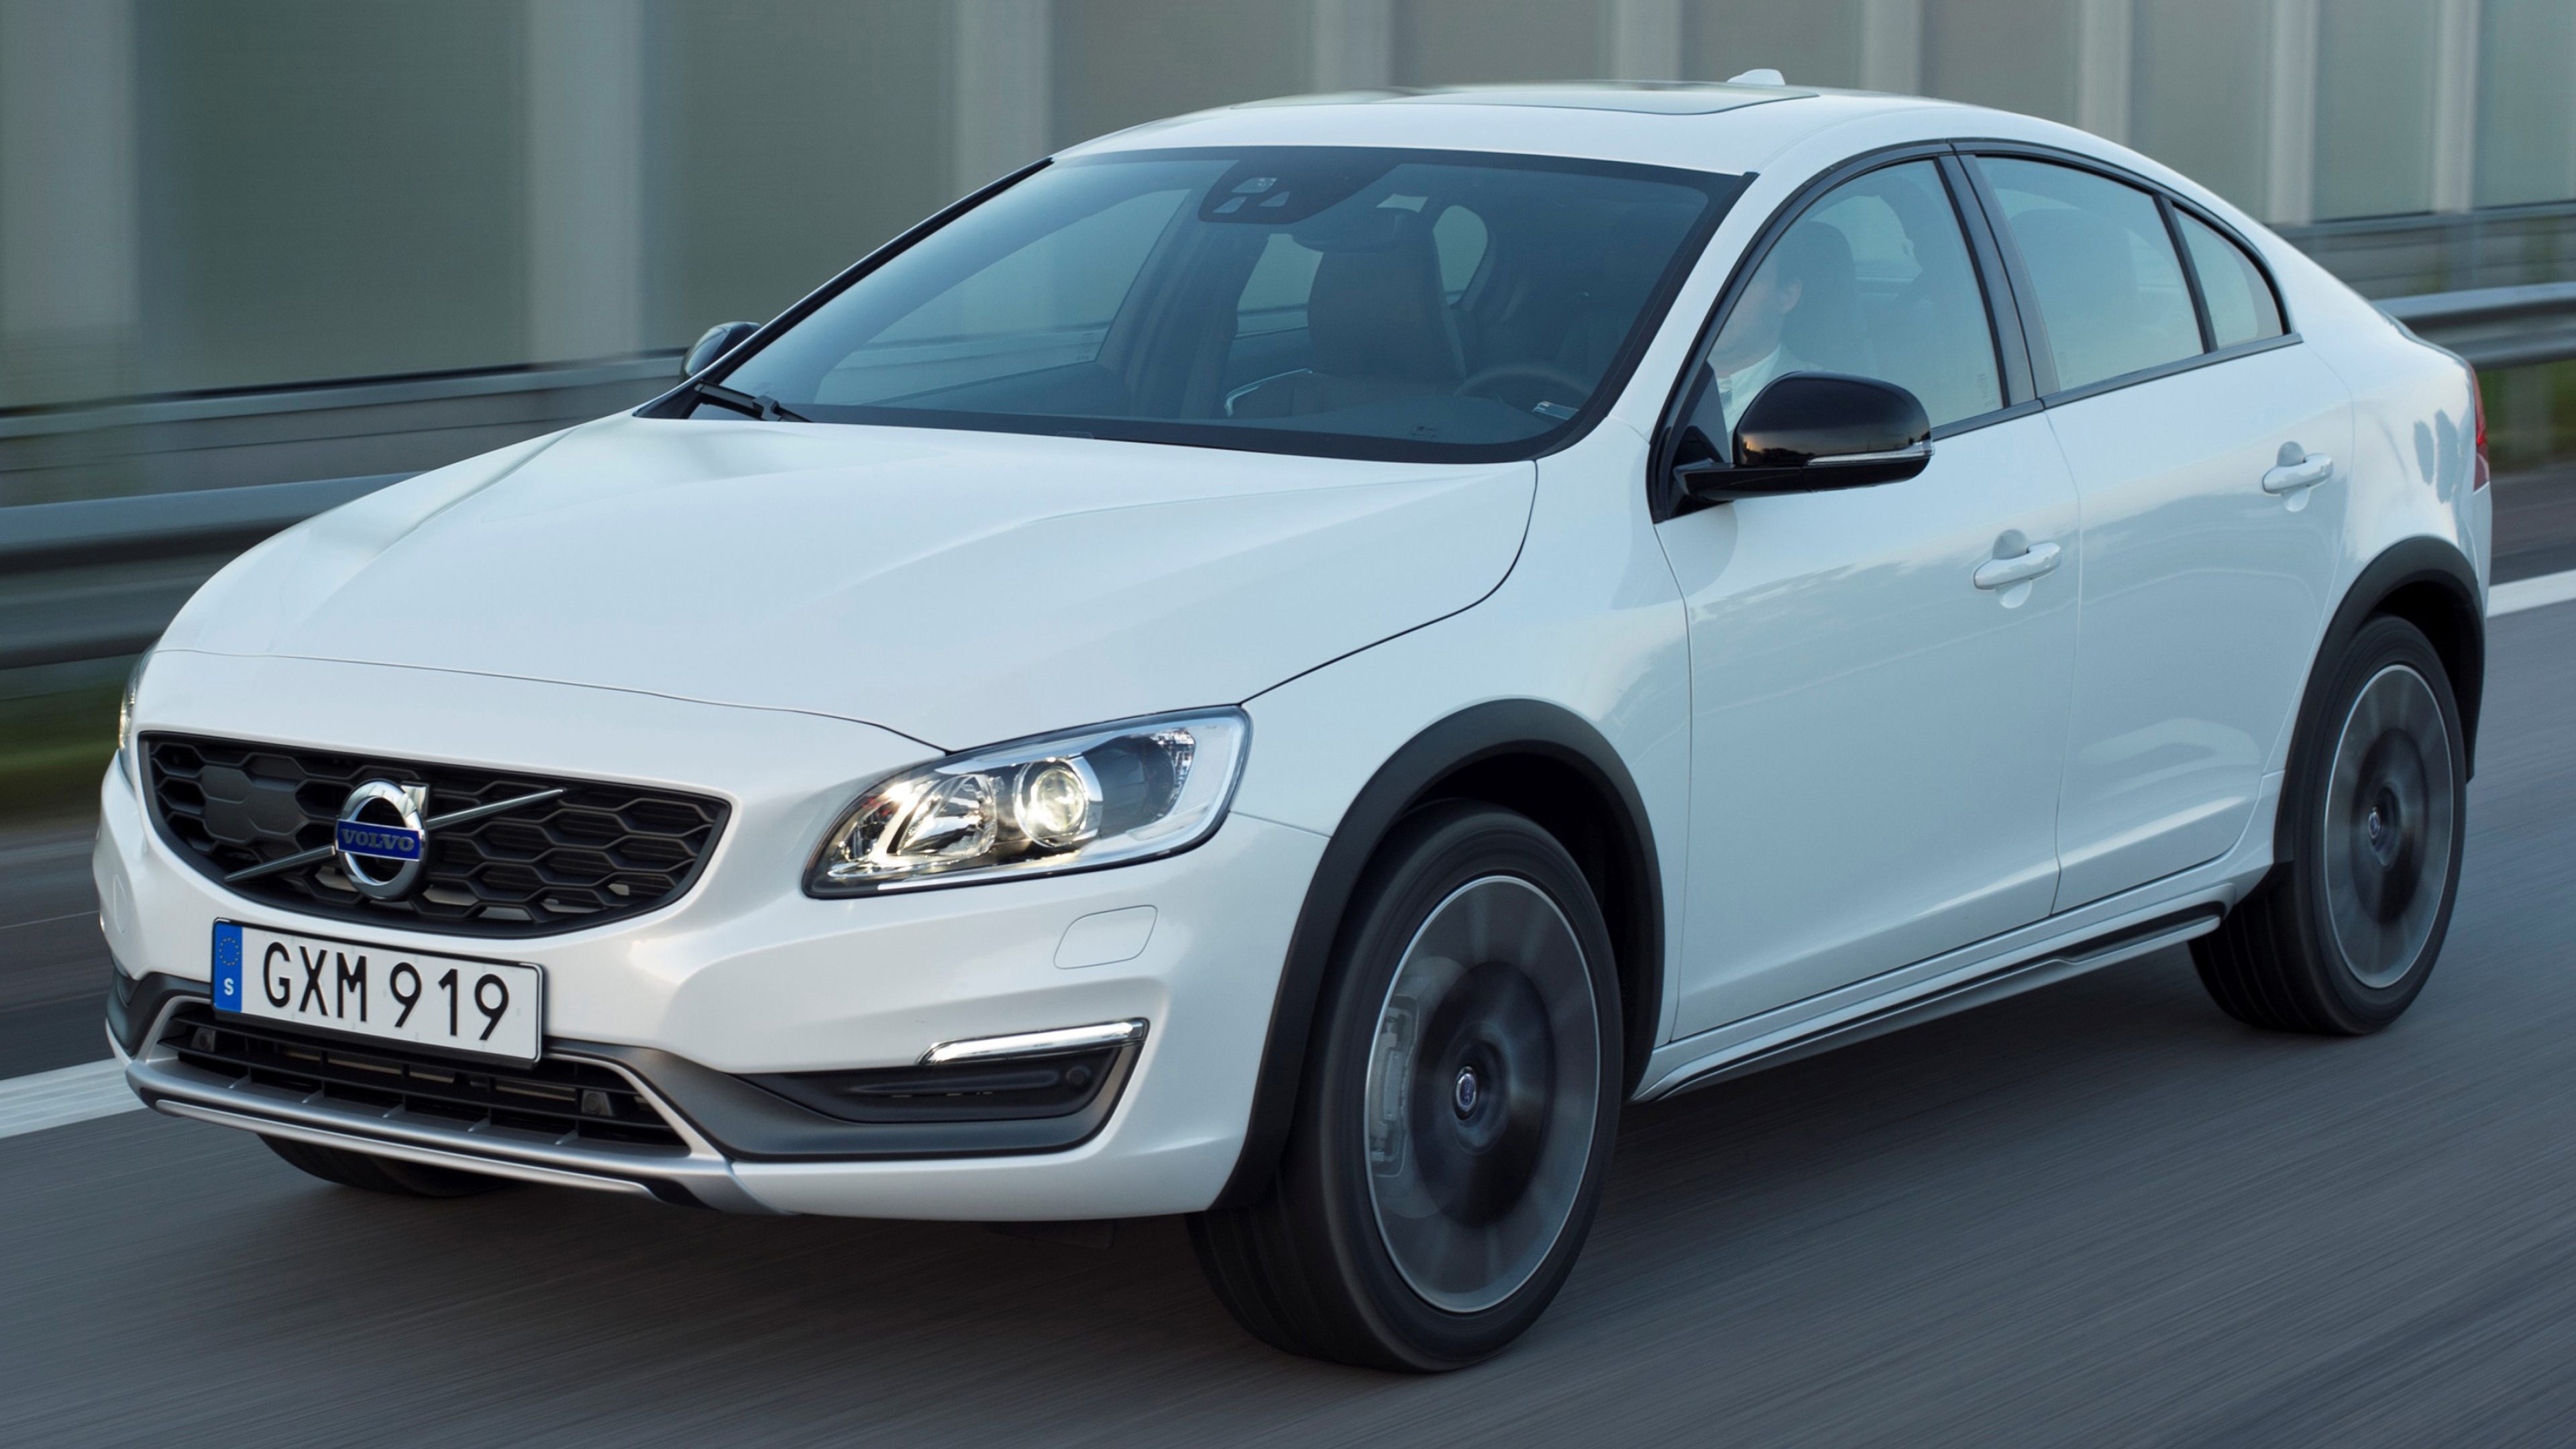 Volvo S60 (Auto), Sophisticated design, Advanced safety features, High-performance capabilities, 3840x2160 4K Desktop